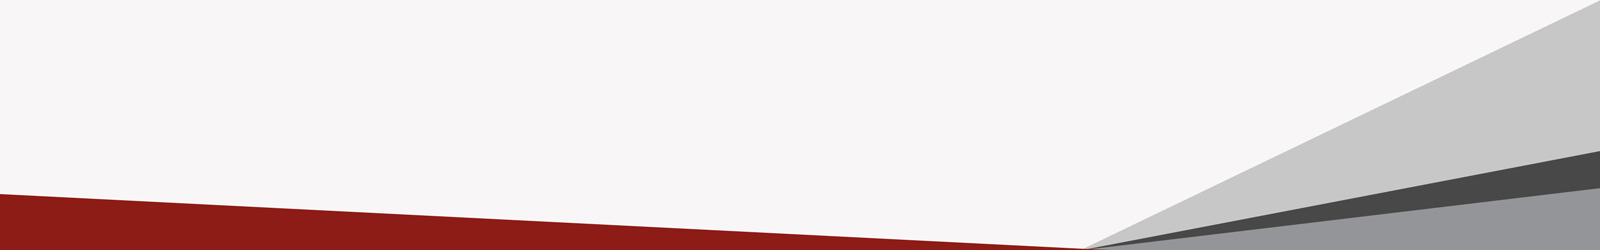 Red and grey banner